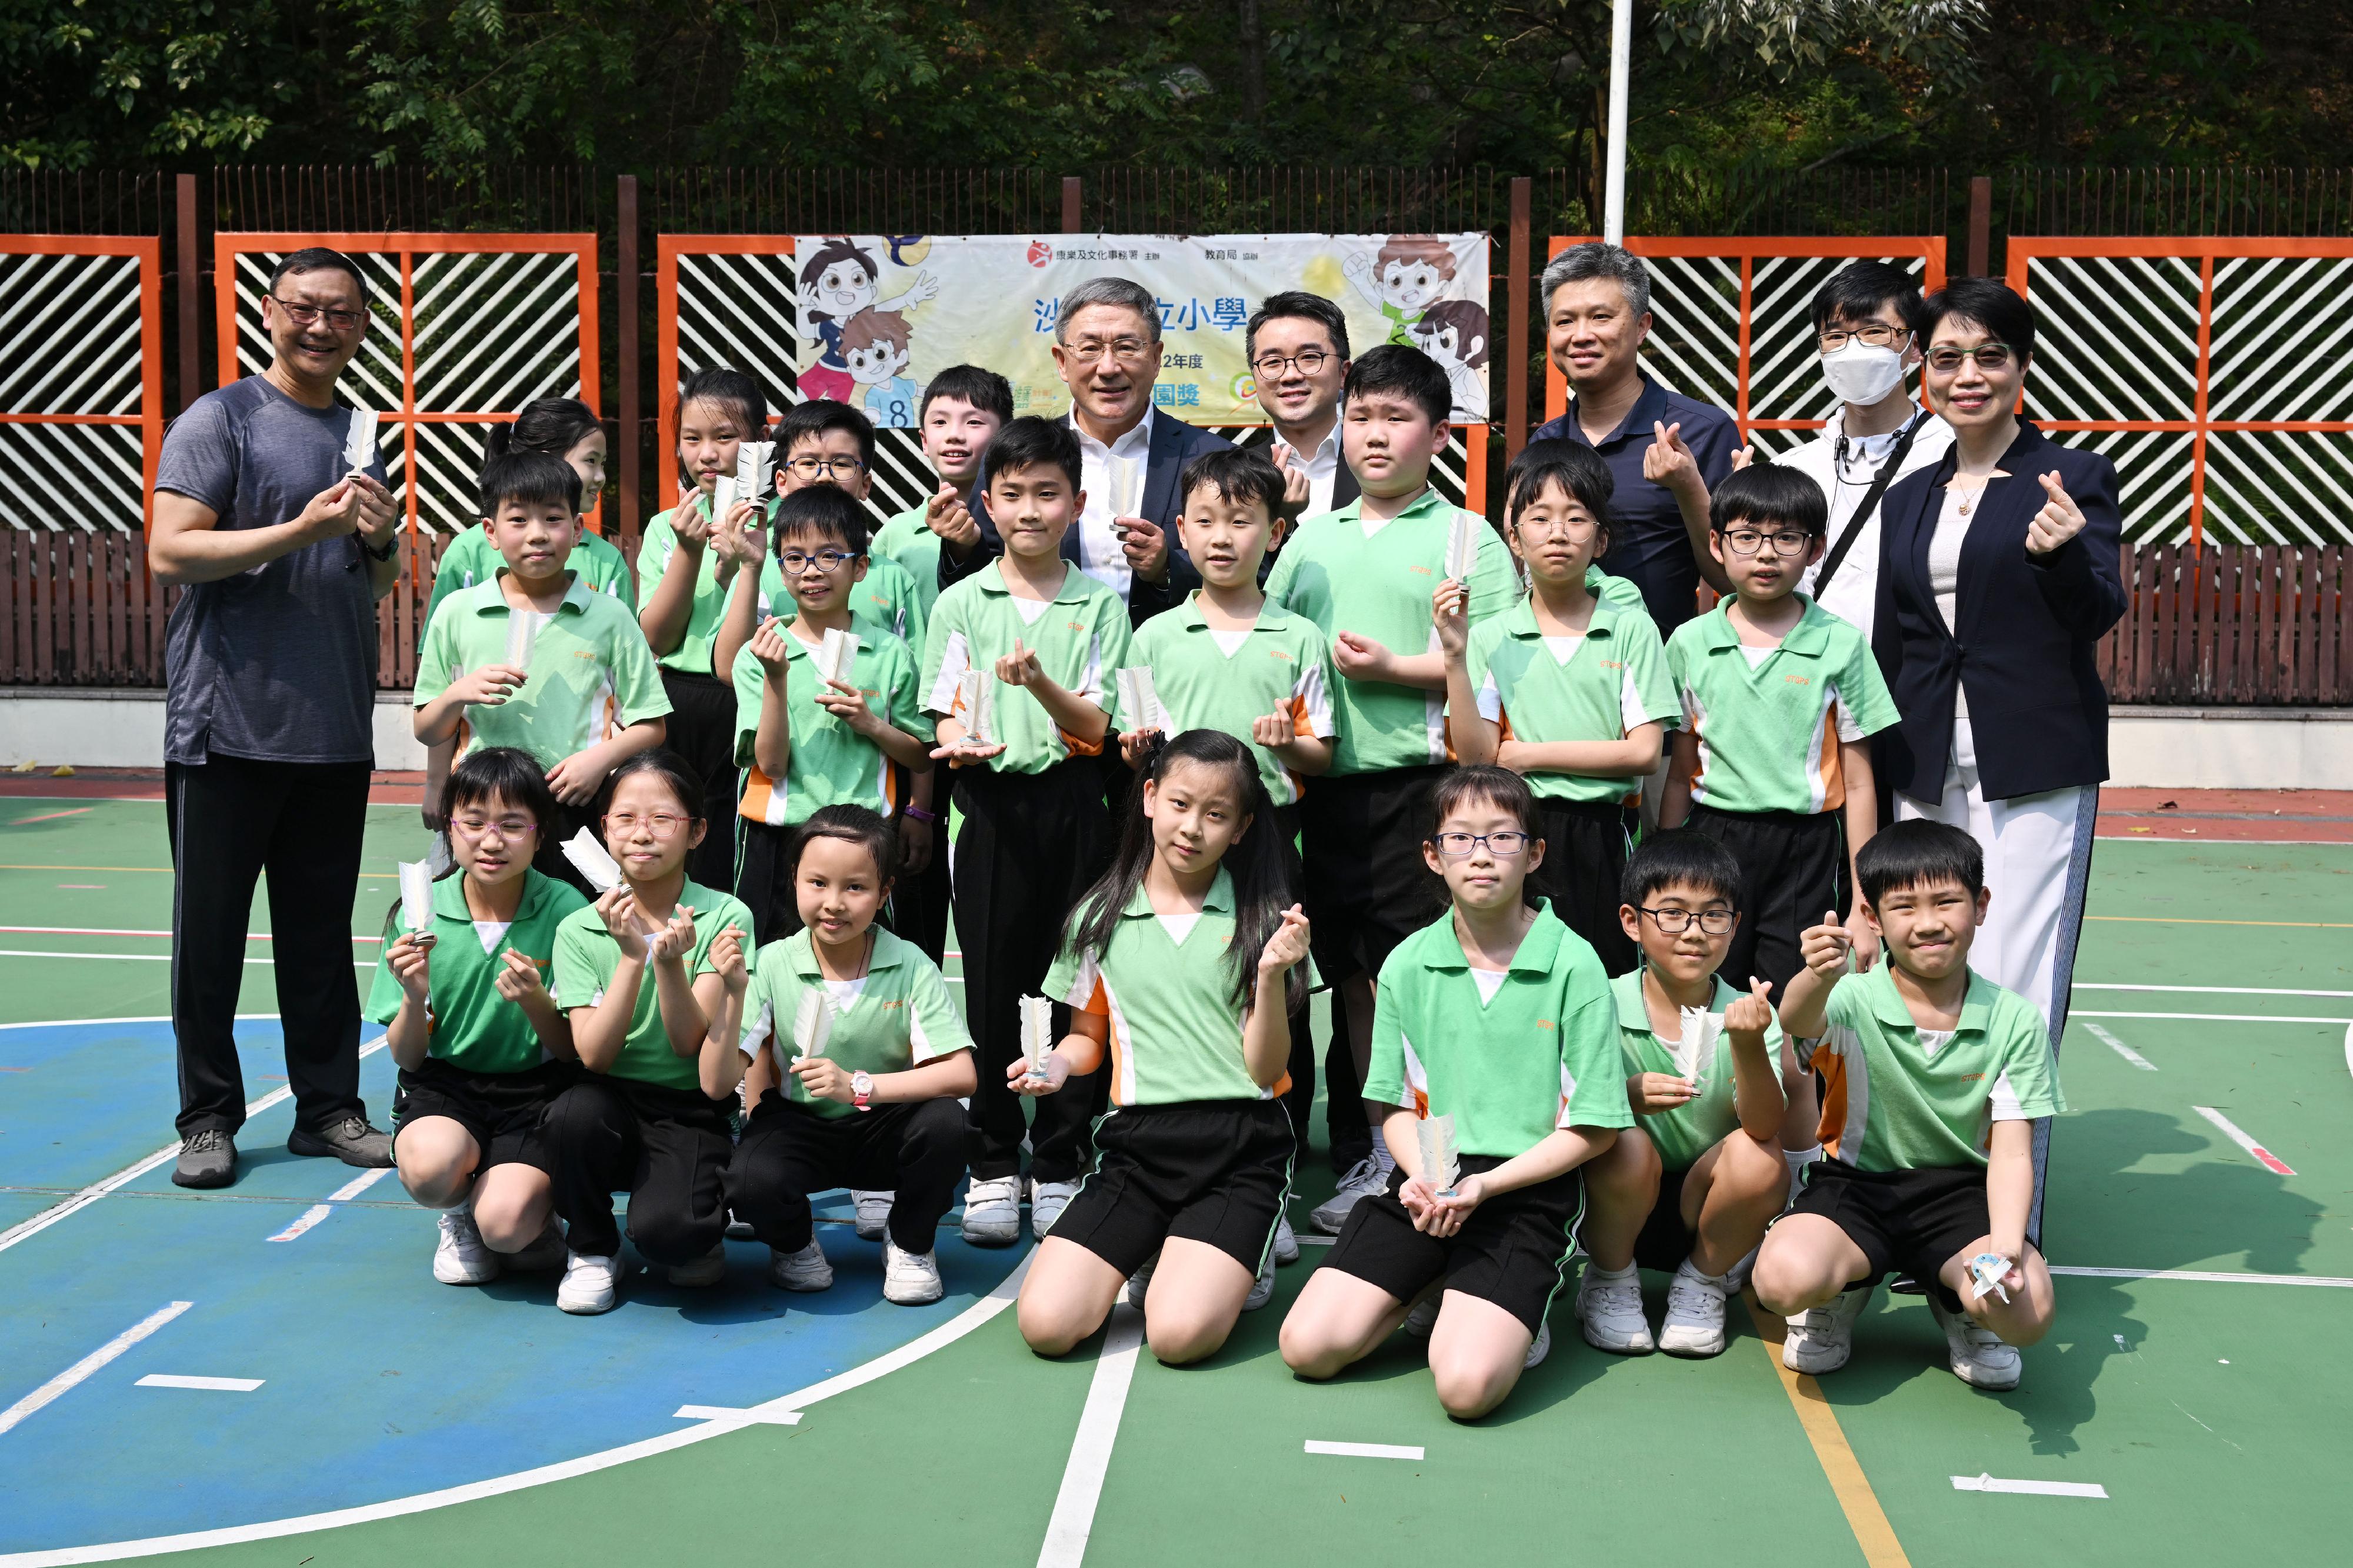 The Deputy Chief Secretary for Administration, Mr Cheuk Wing-hing (back row, centre), the Acting Secretary for Education, Mr Sze Chun-fai (back row, fourth right), and the school principal Ms Ellen Wong (back row, first right) join a group photo with the students taking part in a workshop on shuttlecock kicking at Shatin Government Primary School today (April 13).